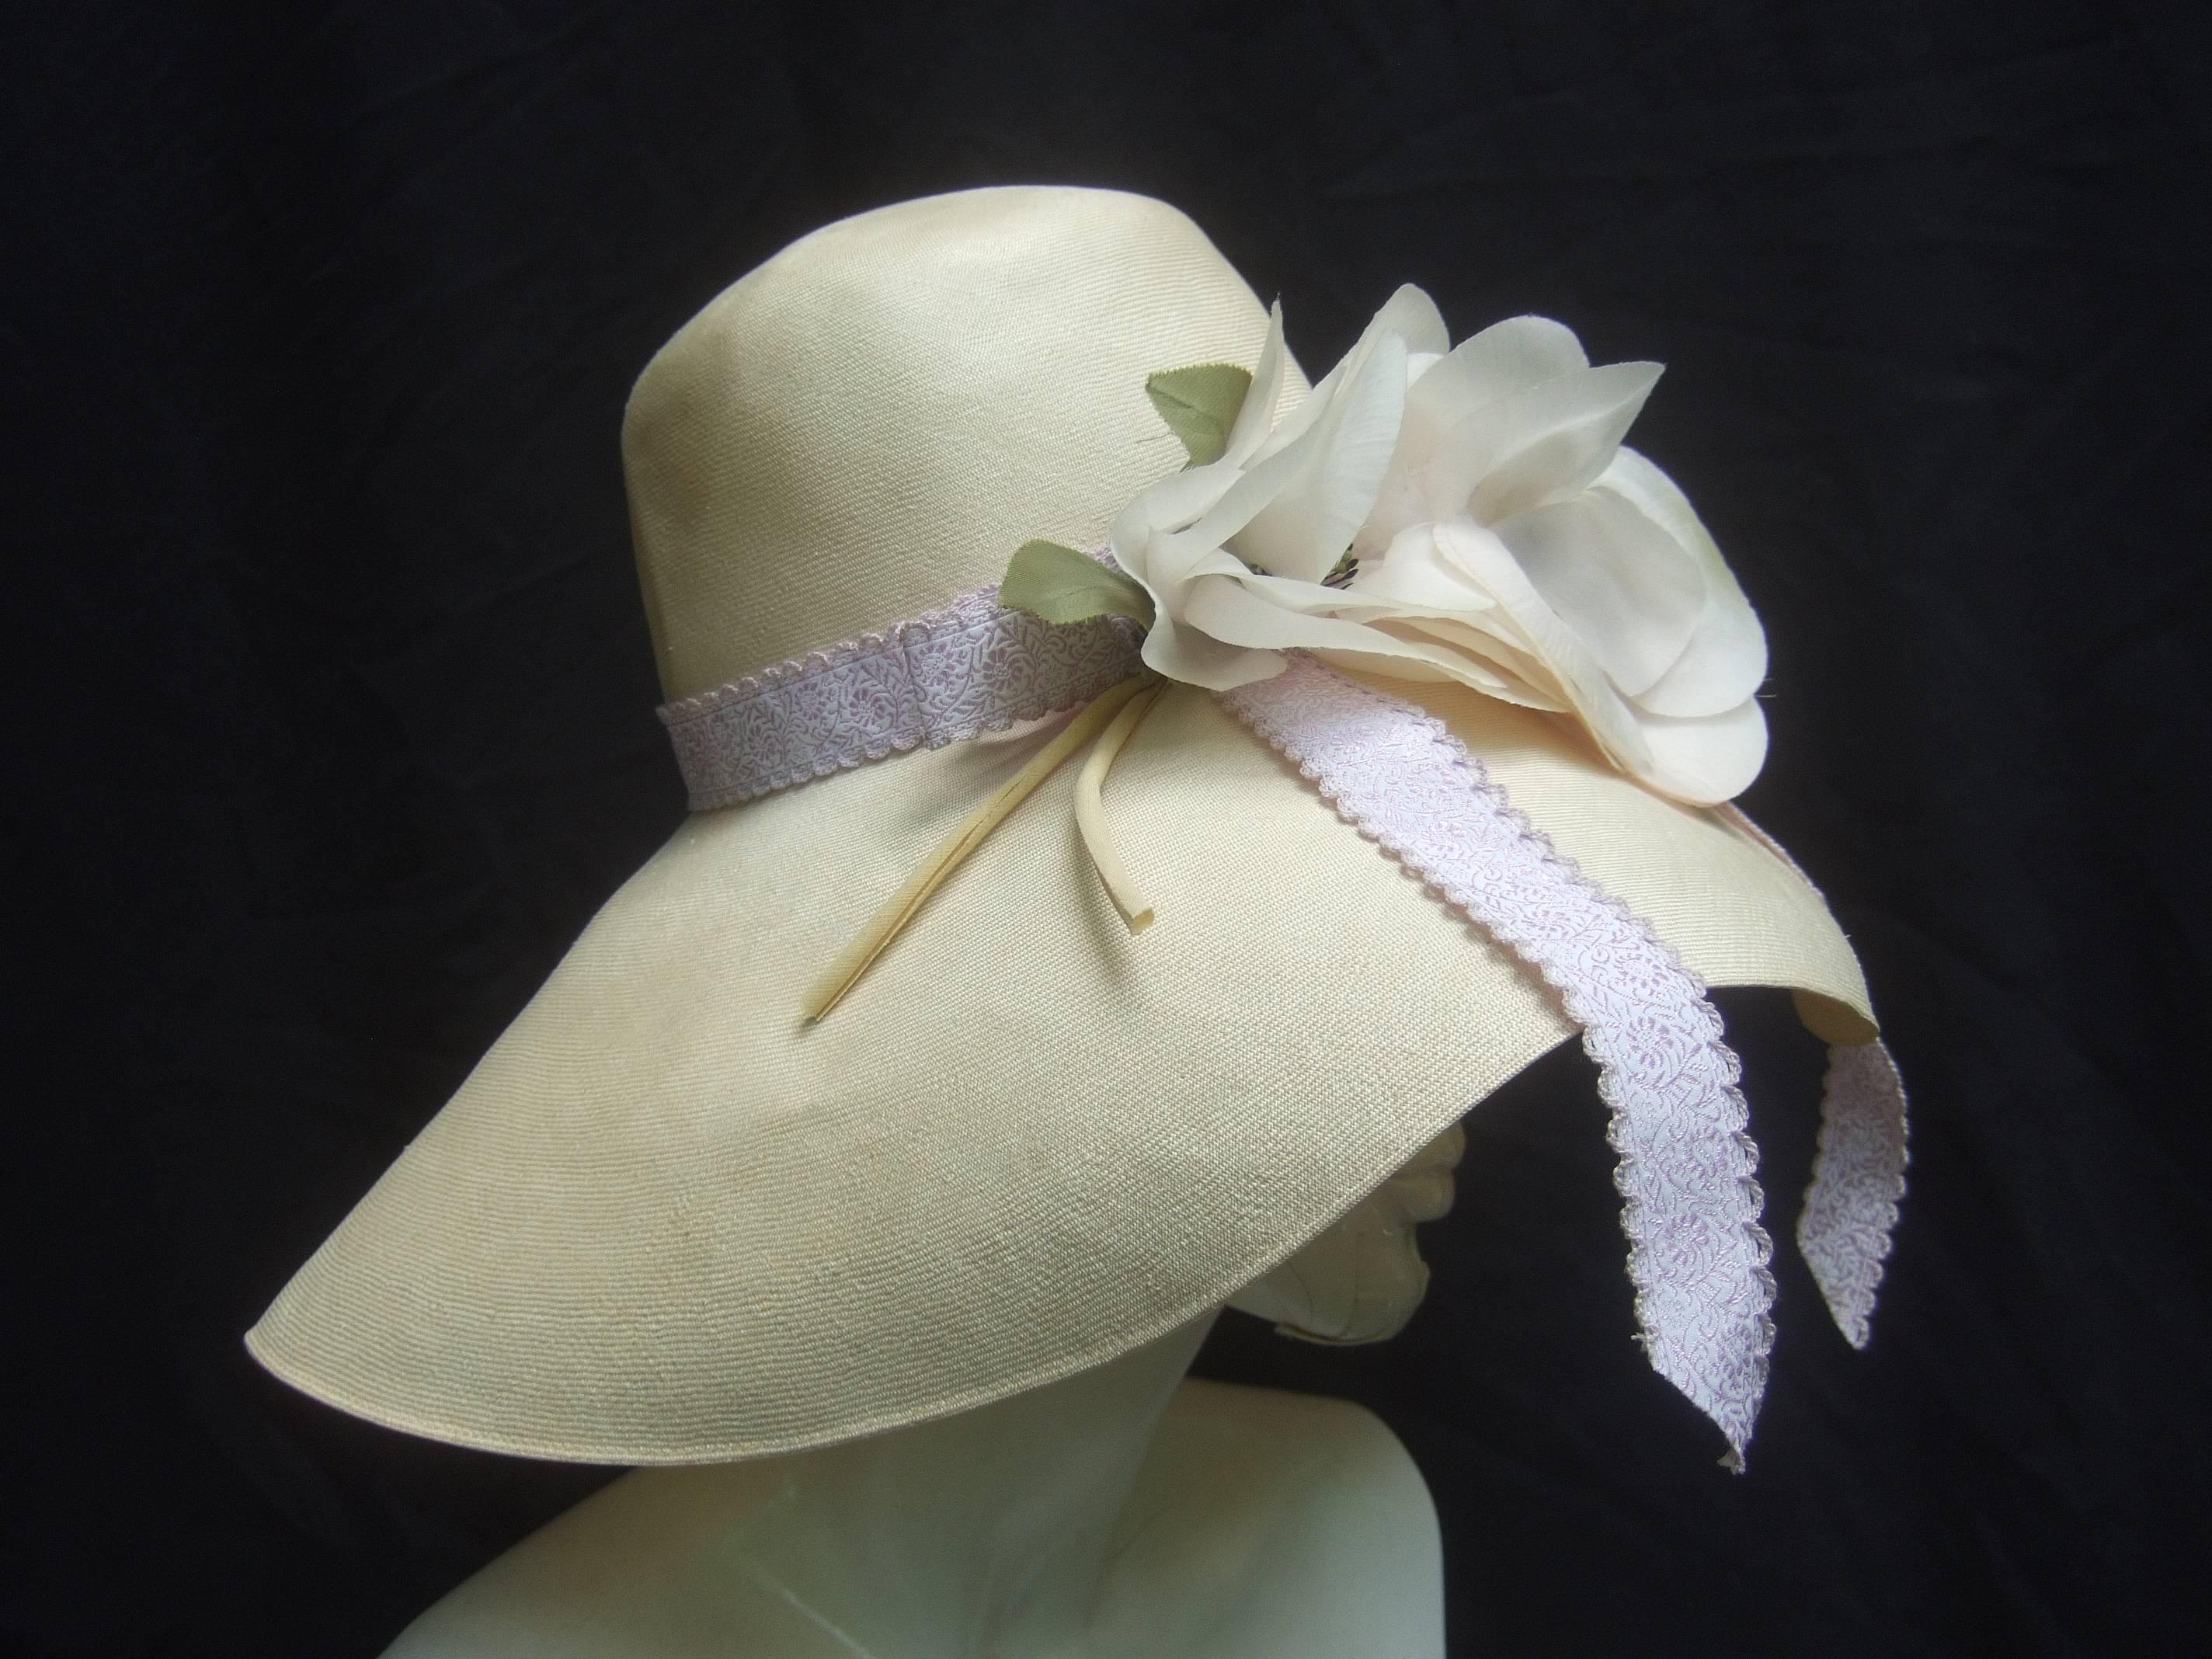 Saks Fifth Avenue Romantic raffia hat by Adolfo
The light breezy raffia hat is adorned with 
a pair of lush white camellia flowers
Accented with a billowy lavender ribbon   

Makes a very dramatic accessory perfect
for and summer and resort